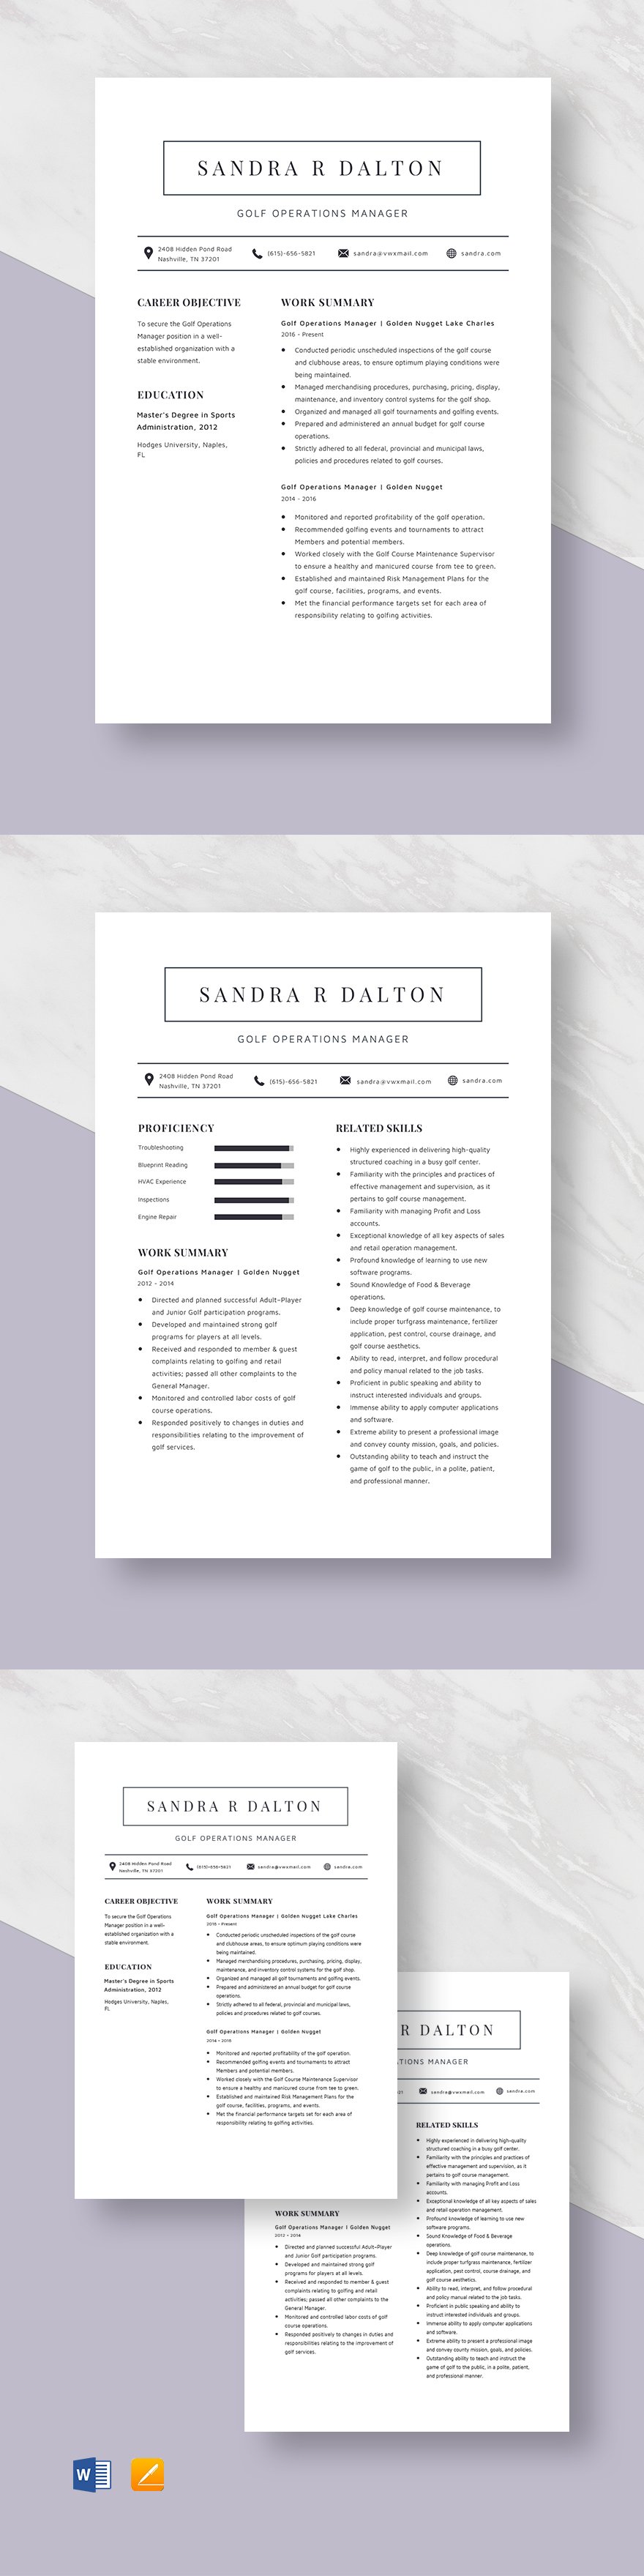 Free Golf Operations Manager Resume Template